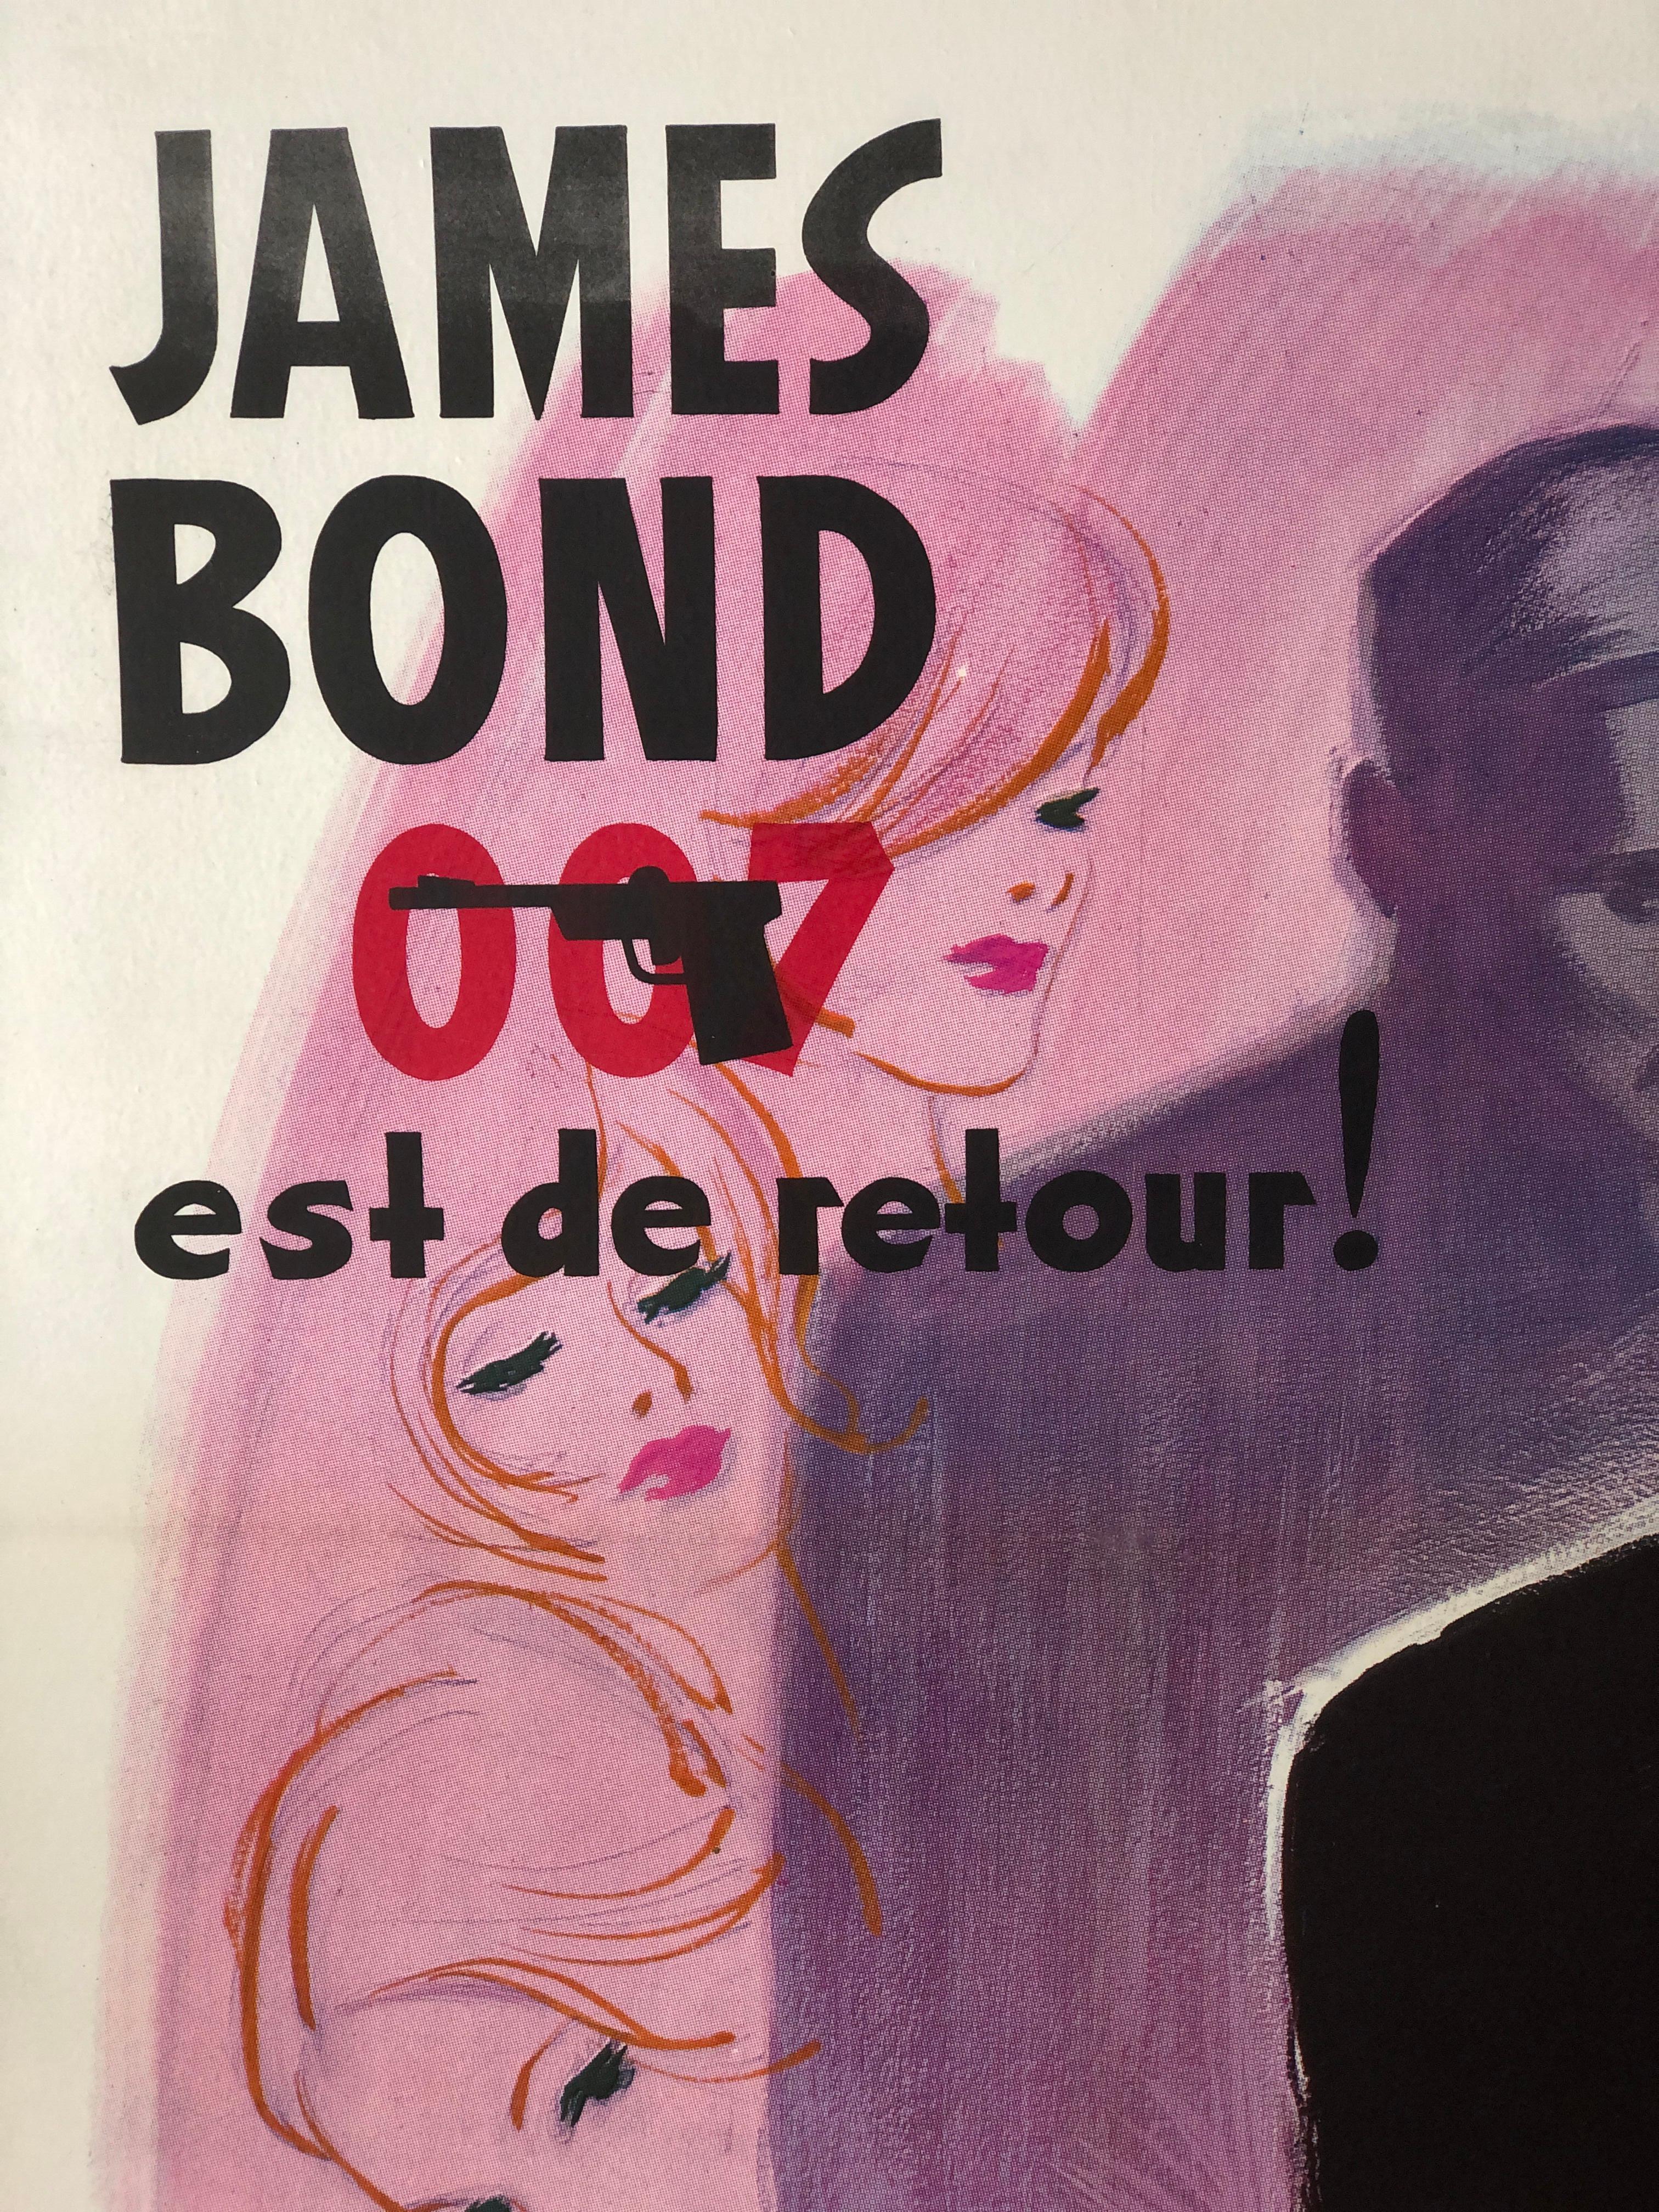 Paper James Bond 'From Russia With Love' Vintage French Movie Poster by Grinsson, 1963